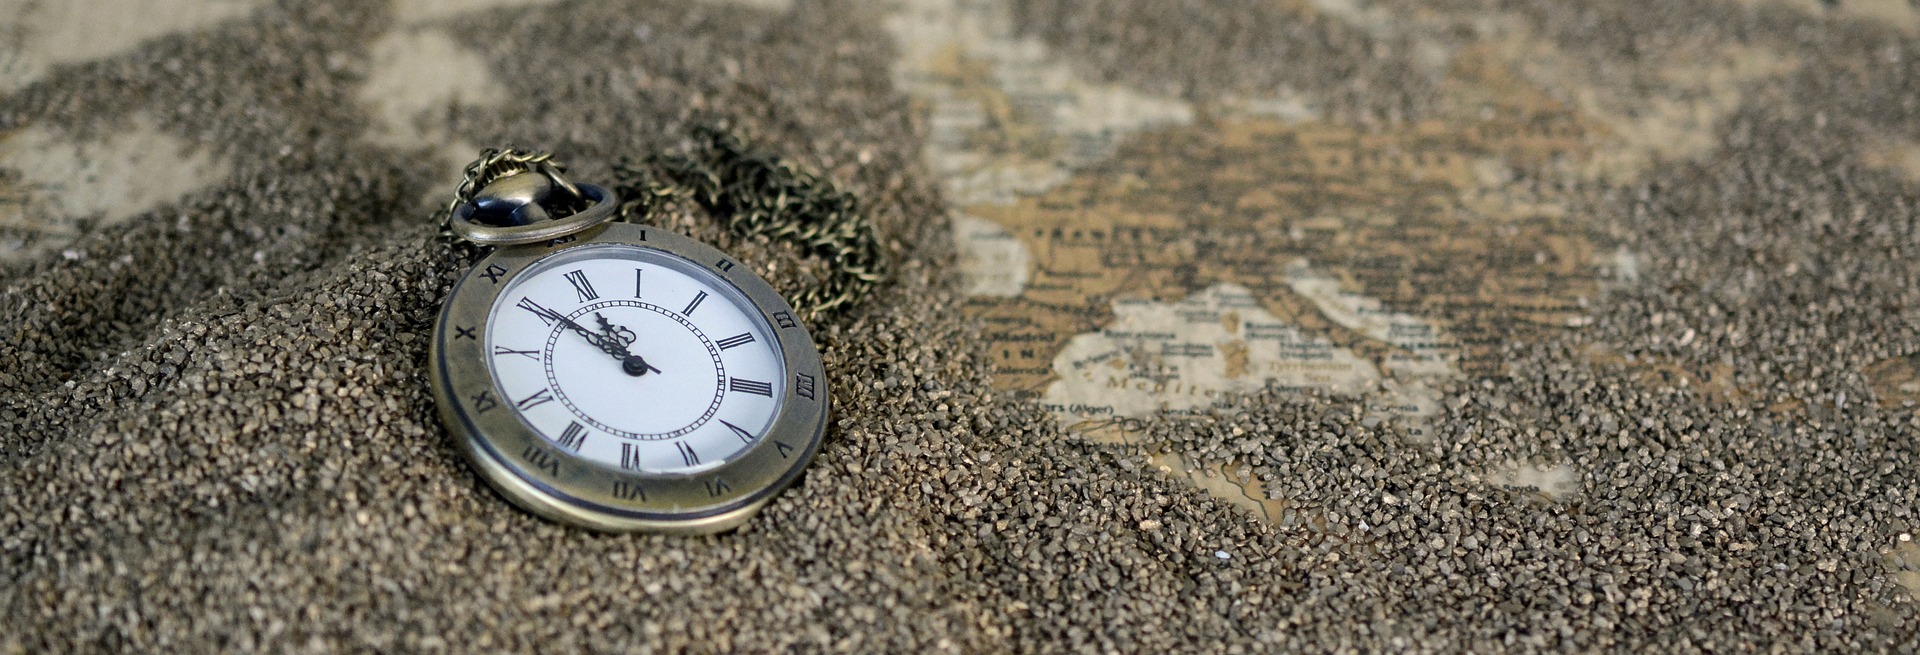 Pocket Watch in the sand